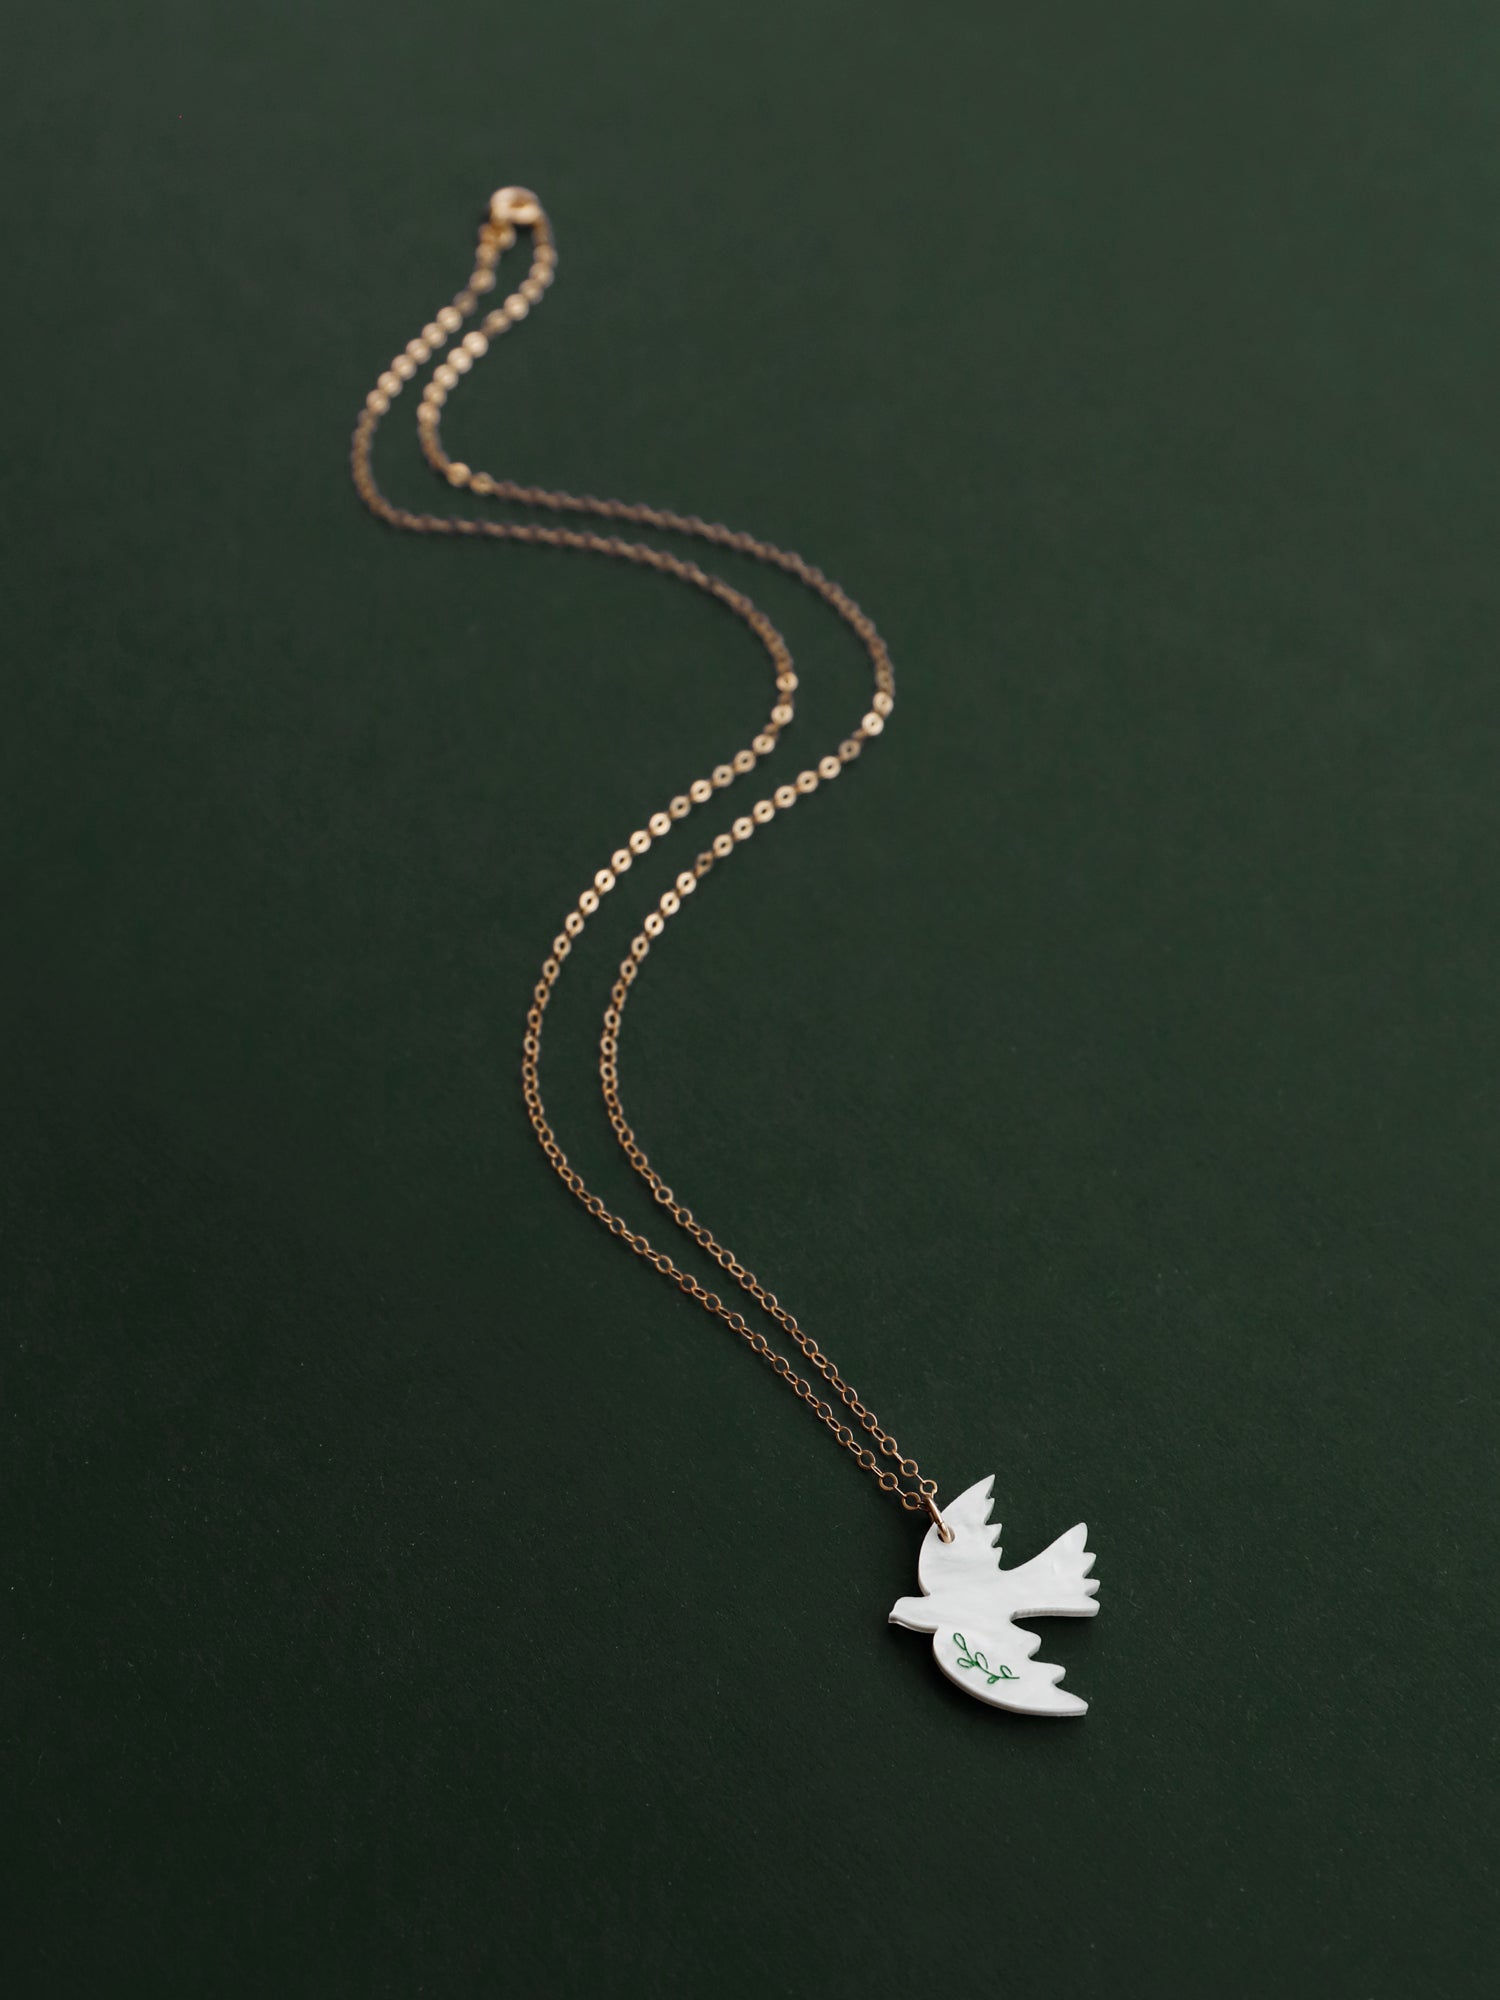 Dove Necklace - Medical Aid for Palestinians Fundraiser